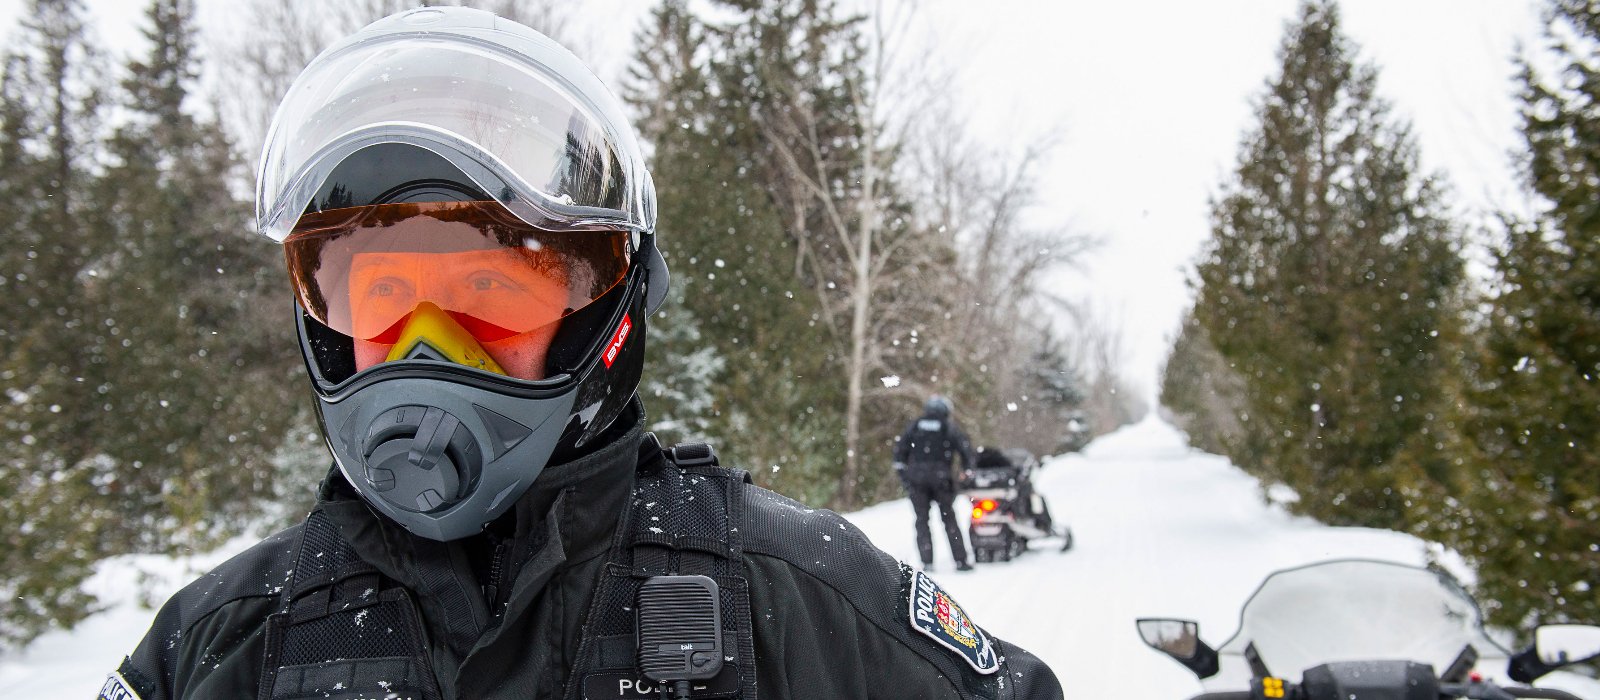 An Ottawa Police Service Officers is out his snowmobile monitoring the safety of the trails